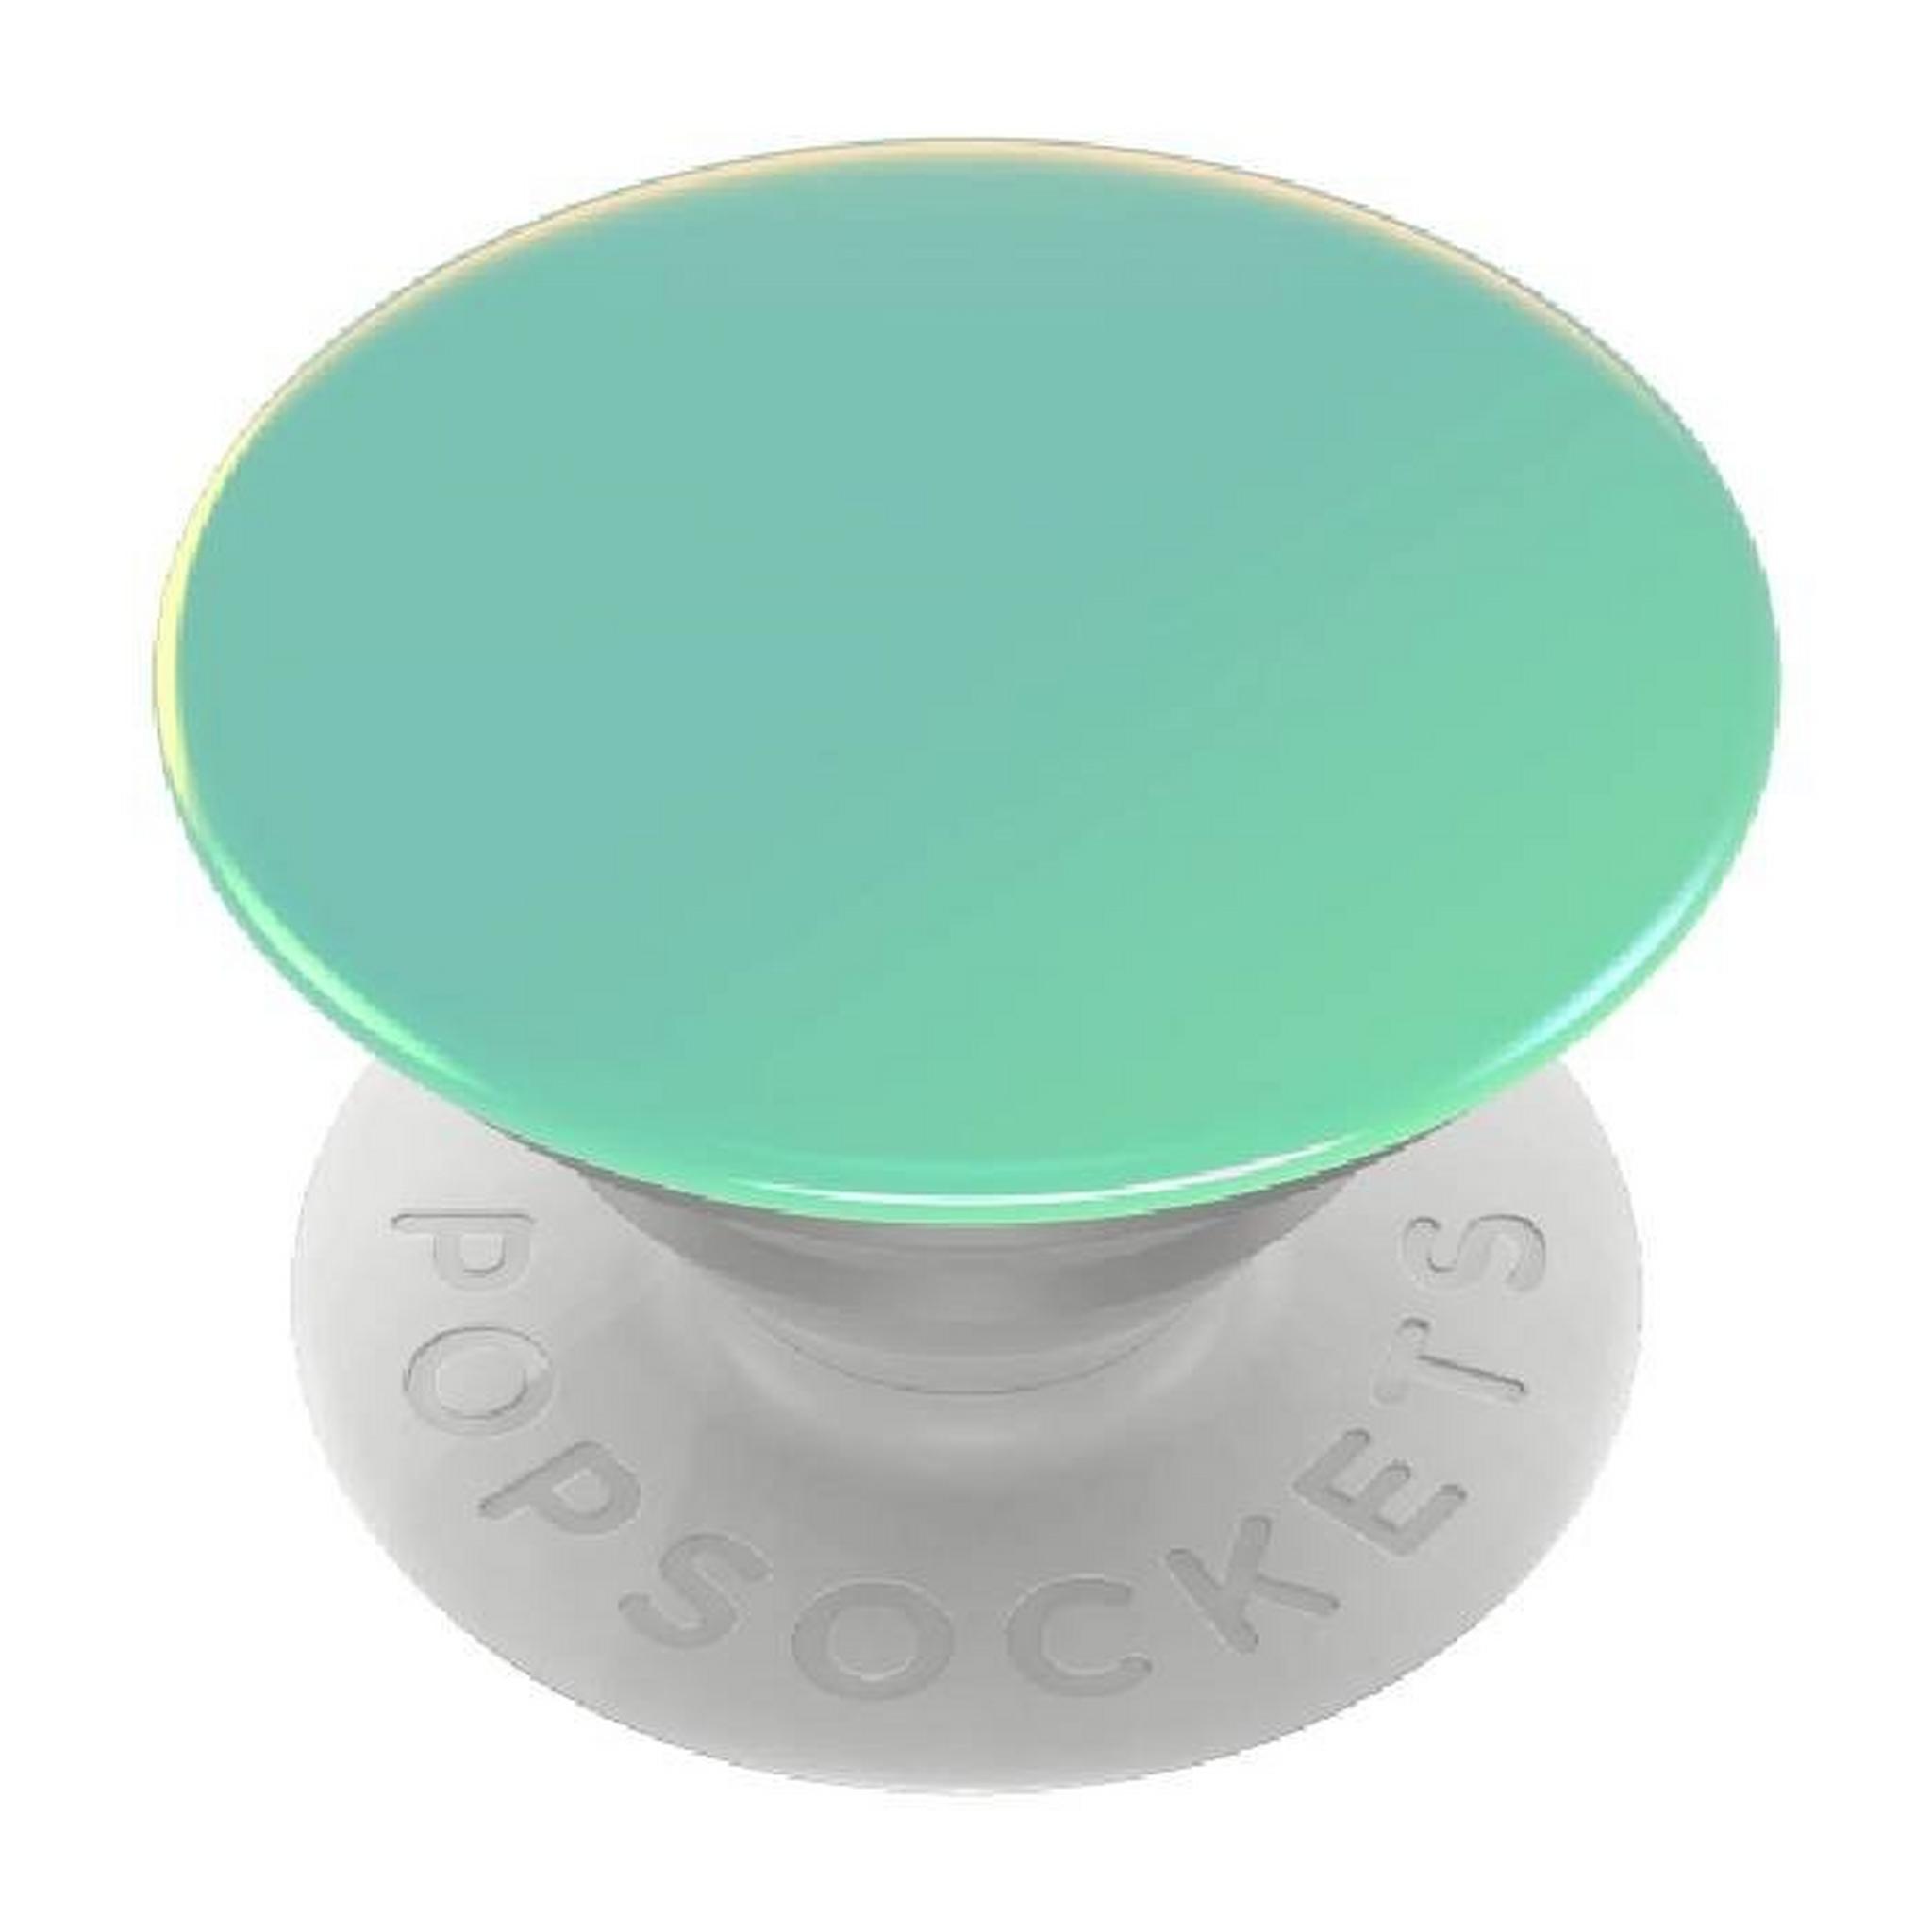 PopSockets Phone Stand and Grip (801900) – Chrome Seafoam